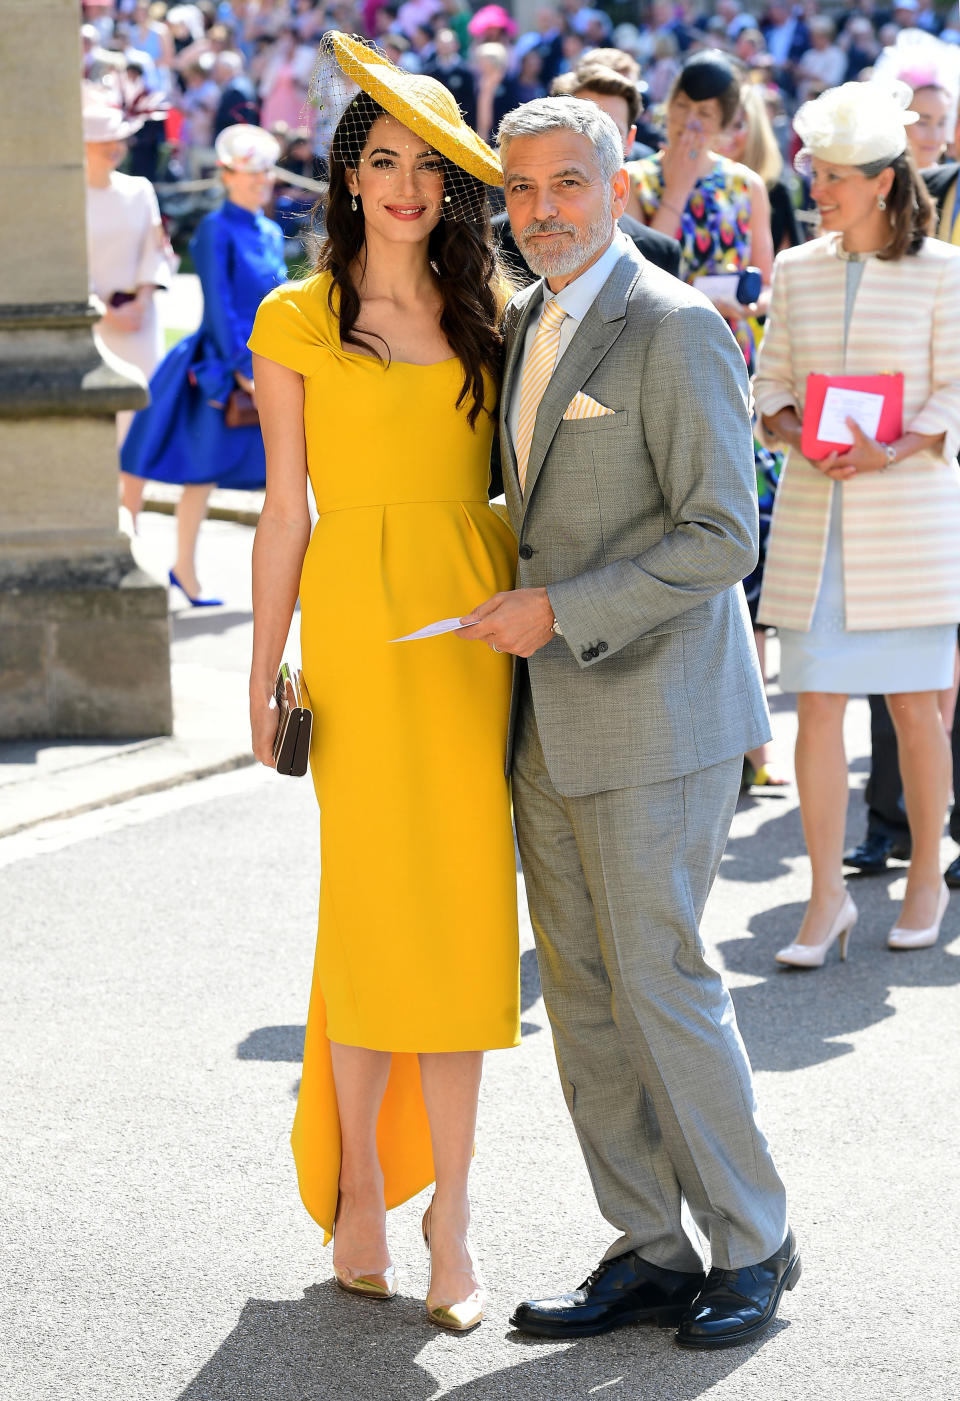 Amal Clooney in Stella McCartney at the royal wedding with her husband, George. (Photo: Getty Images)